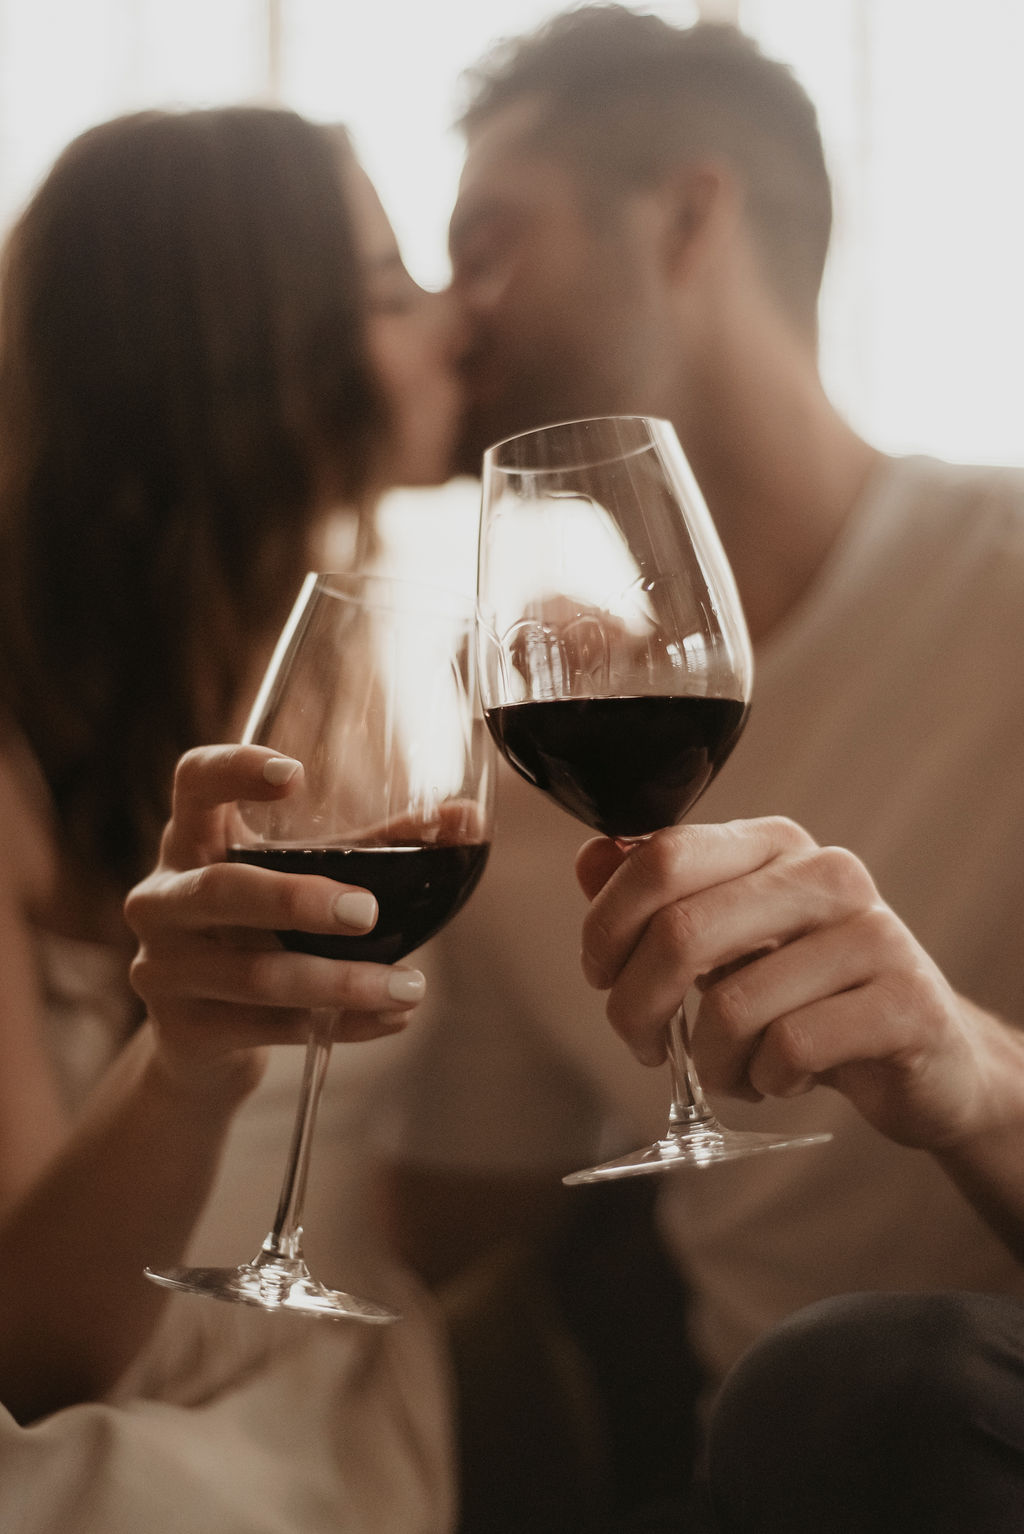 Urban and chic couple shares wine